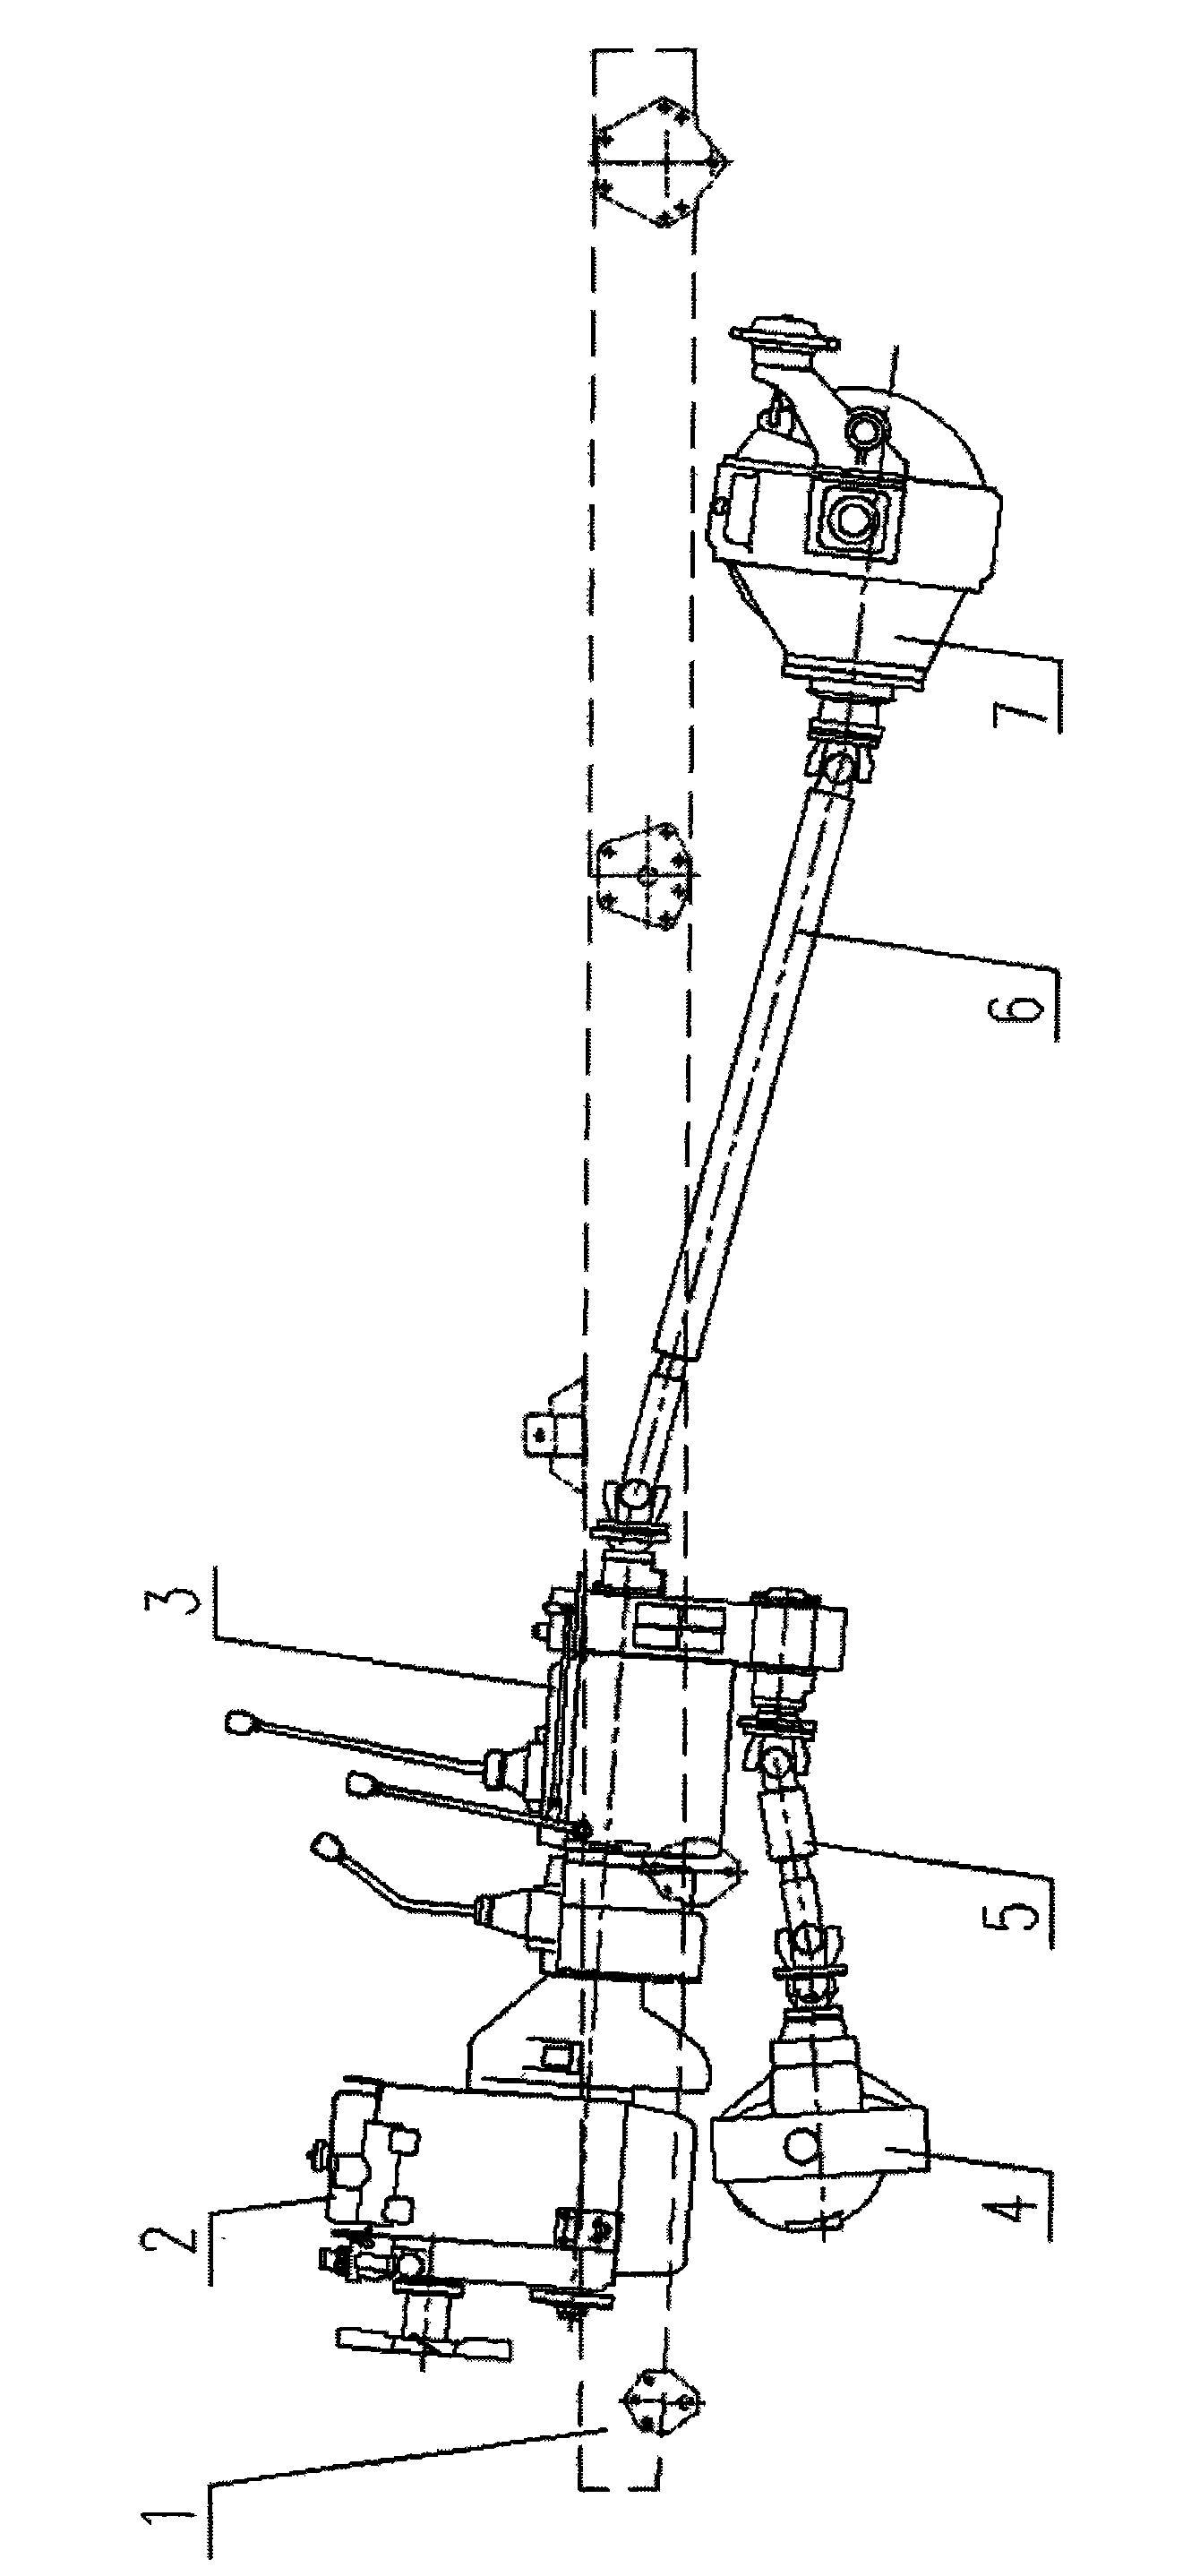 Front and back driving force output structure of automobile tractor without independent transfer case